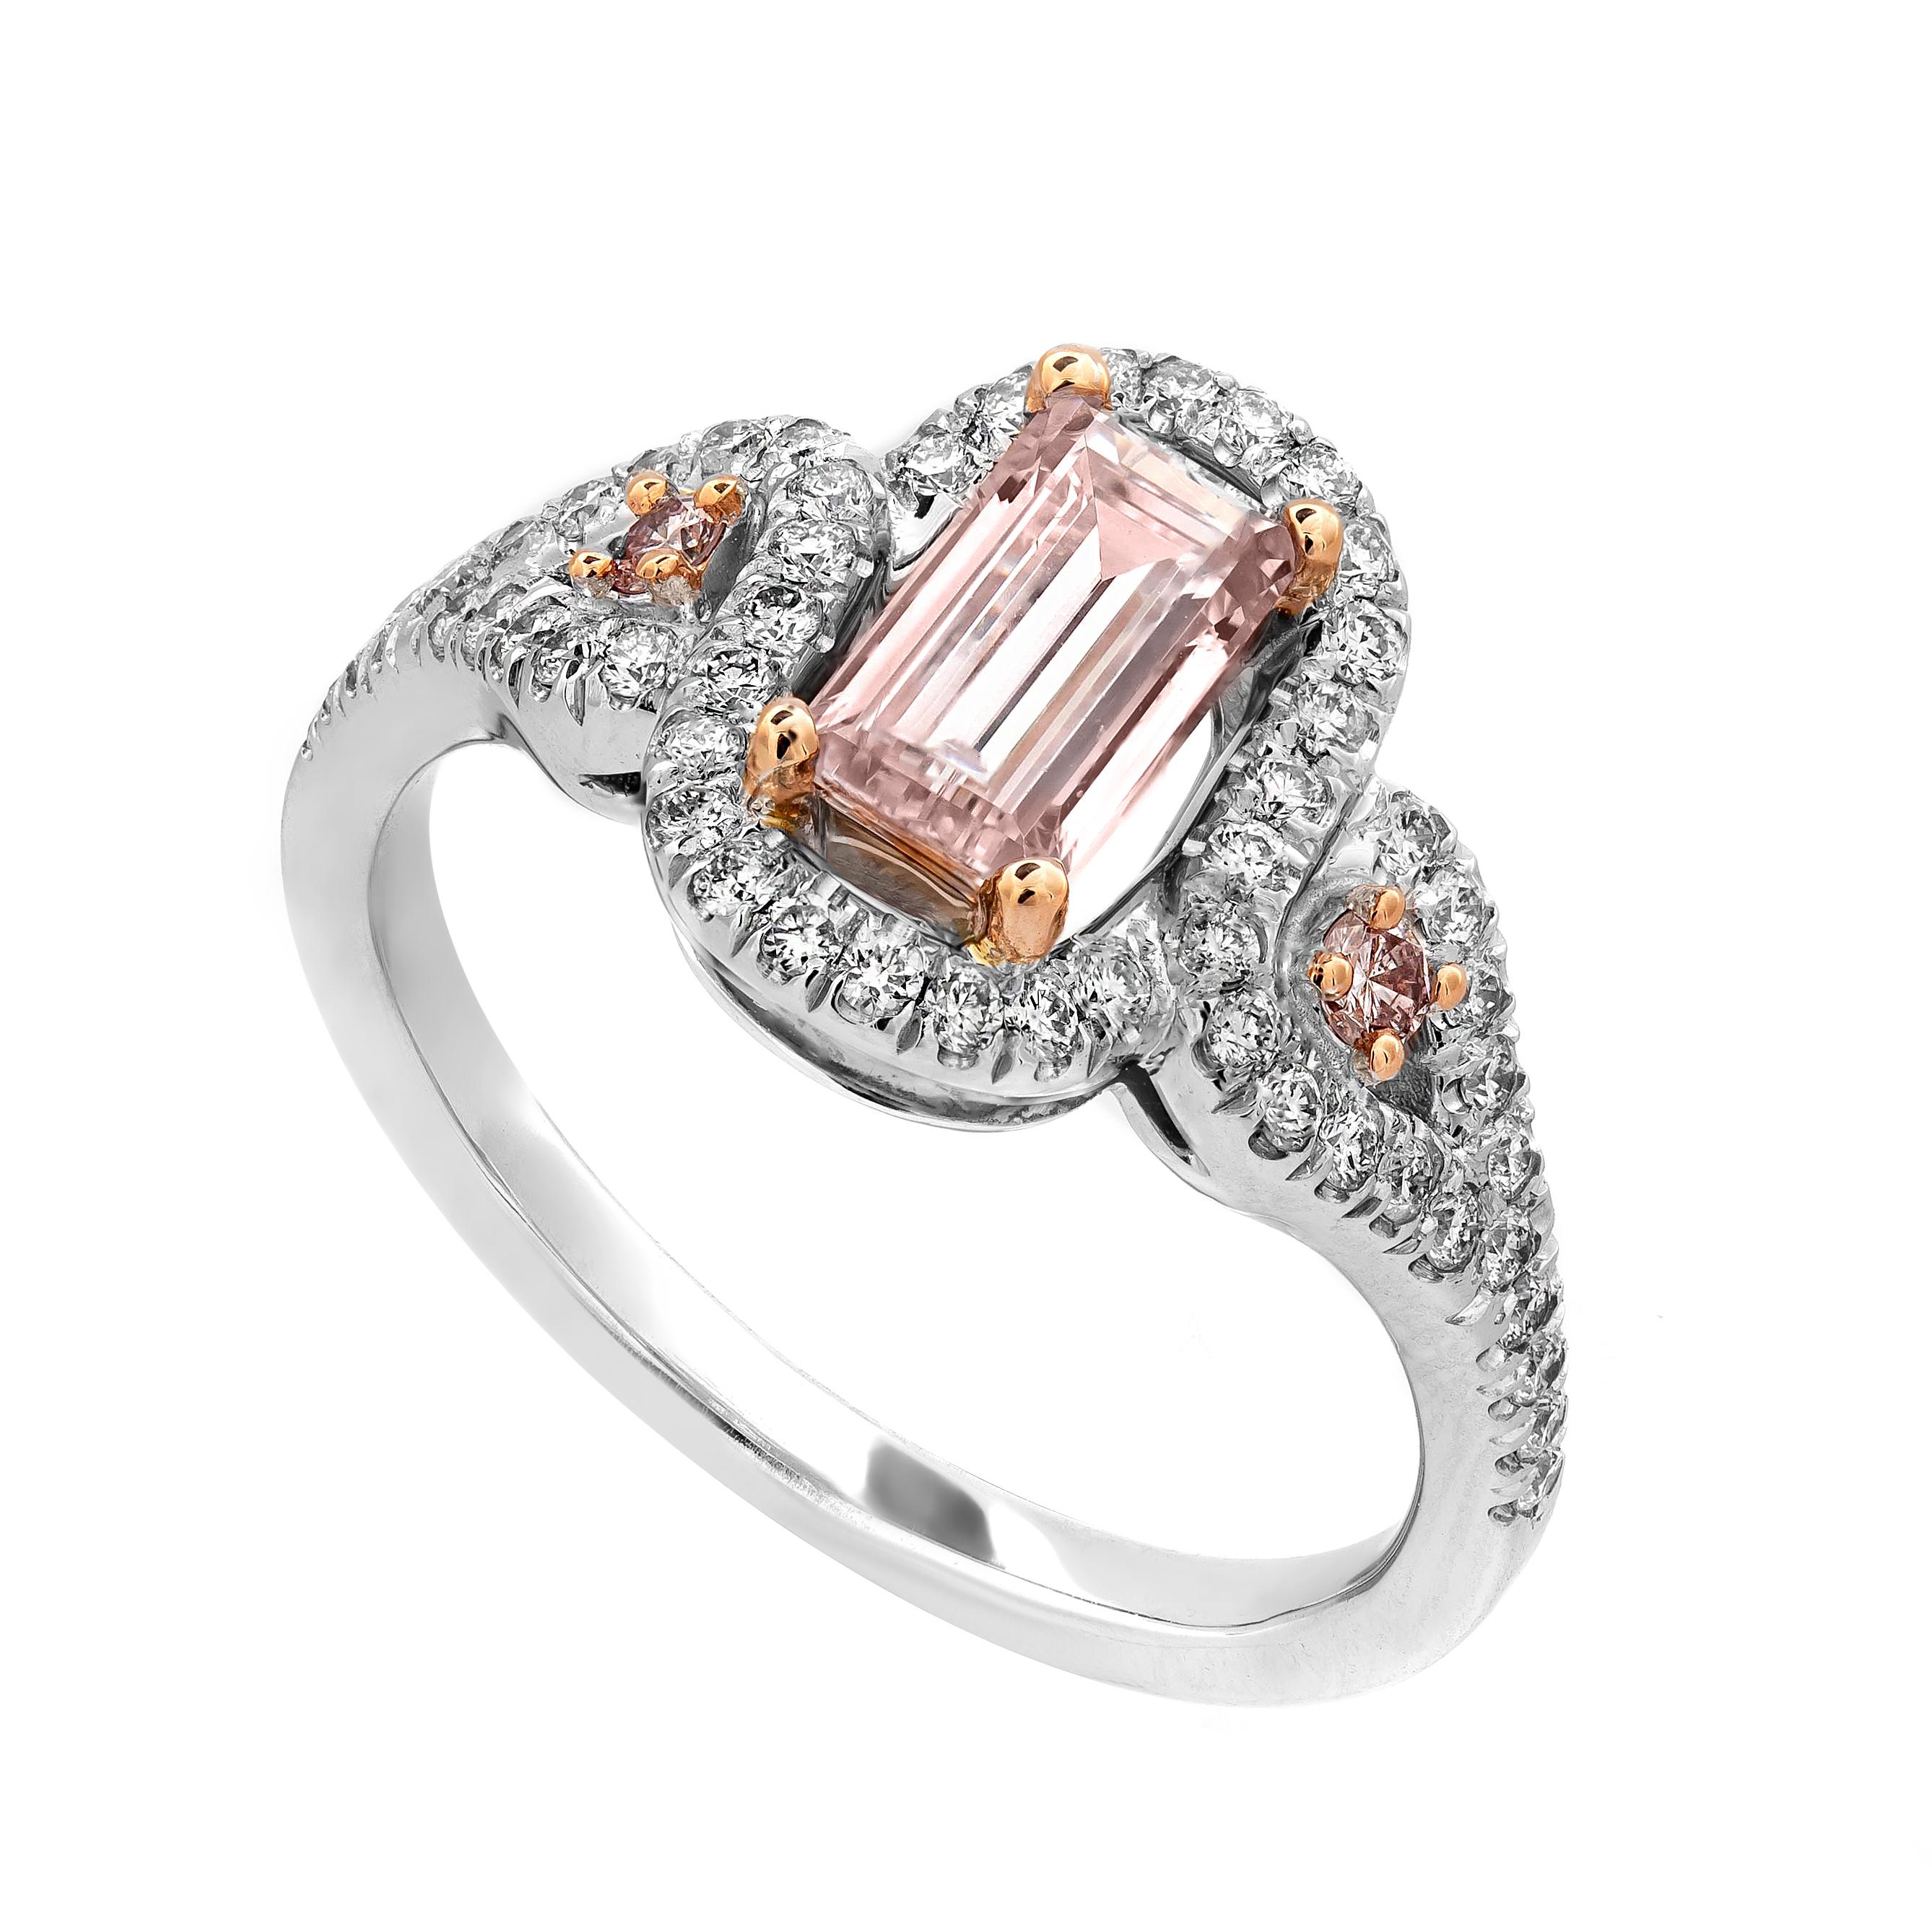 Experience elegance personified with this exquisite ring adorned by a striking 0.83 carat Fancy Pink Diamond, boasting a remarkable VS2 Clarity. Renowned as some of the rarest and most coveted gemstones globally, Pink Diamonds exude unparalleled